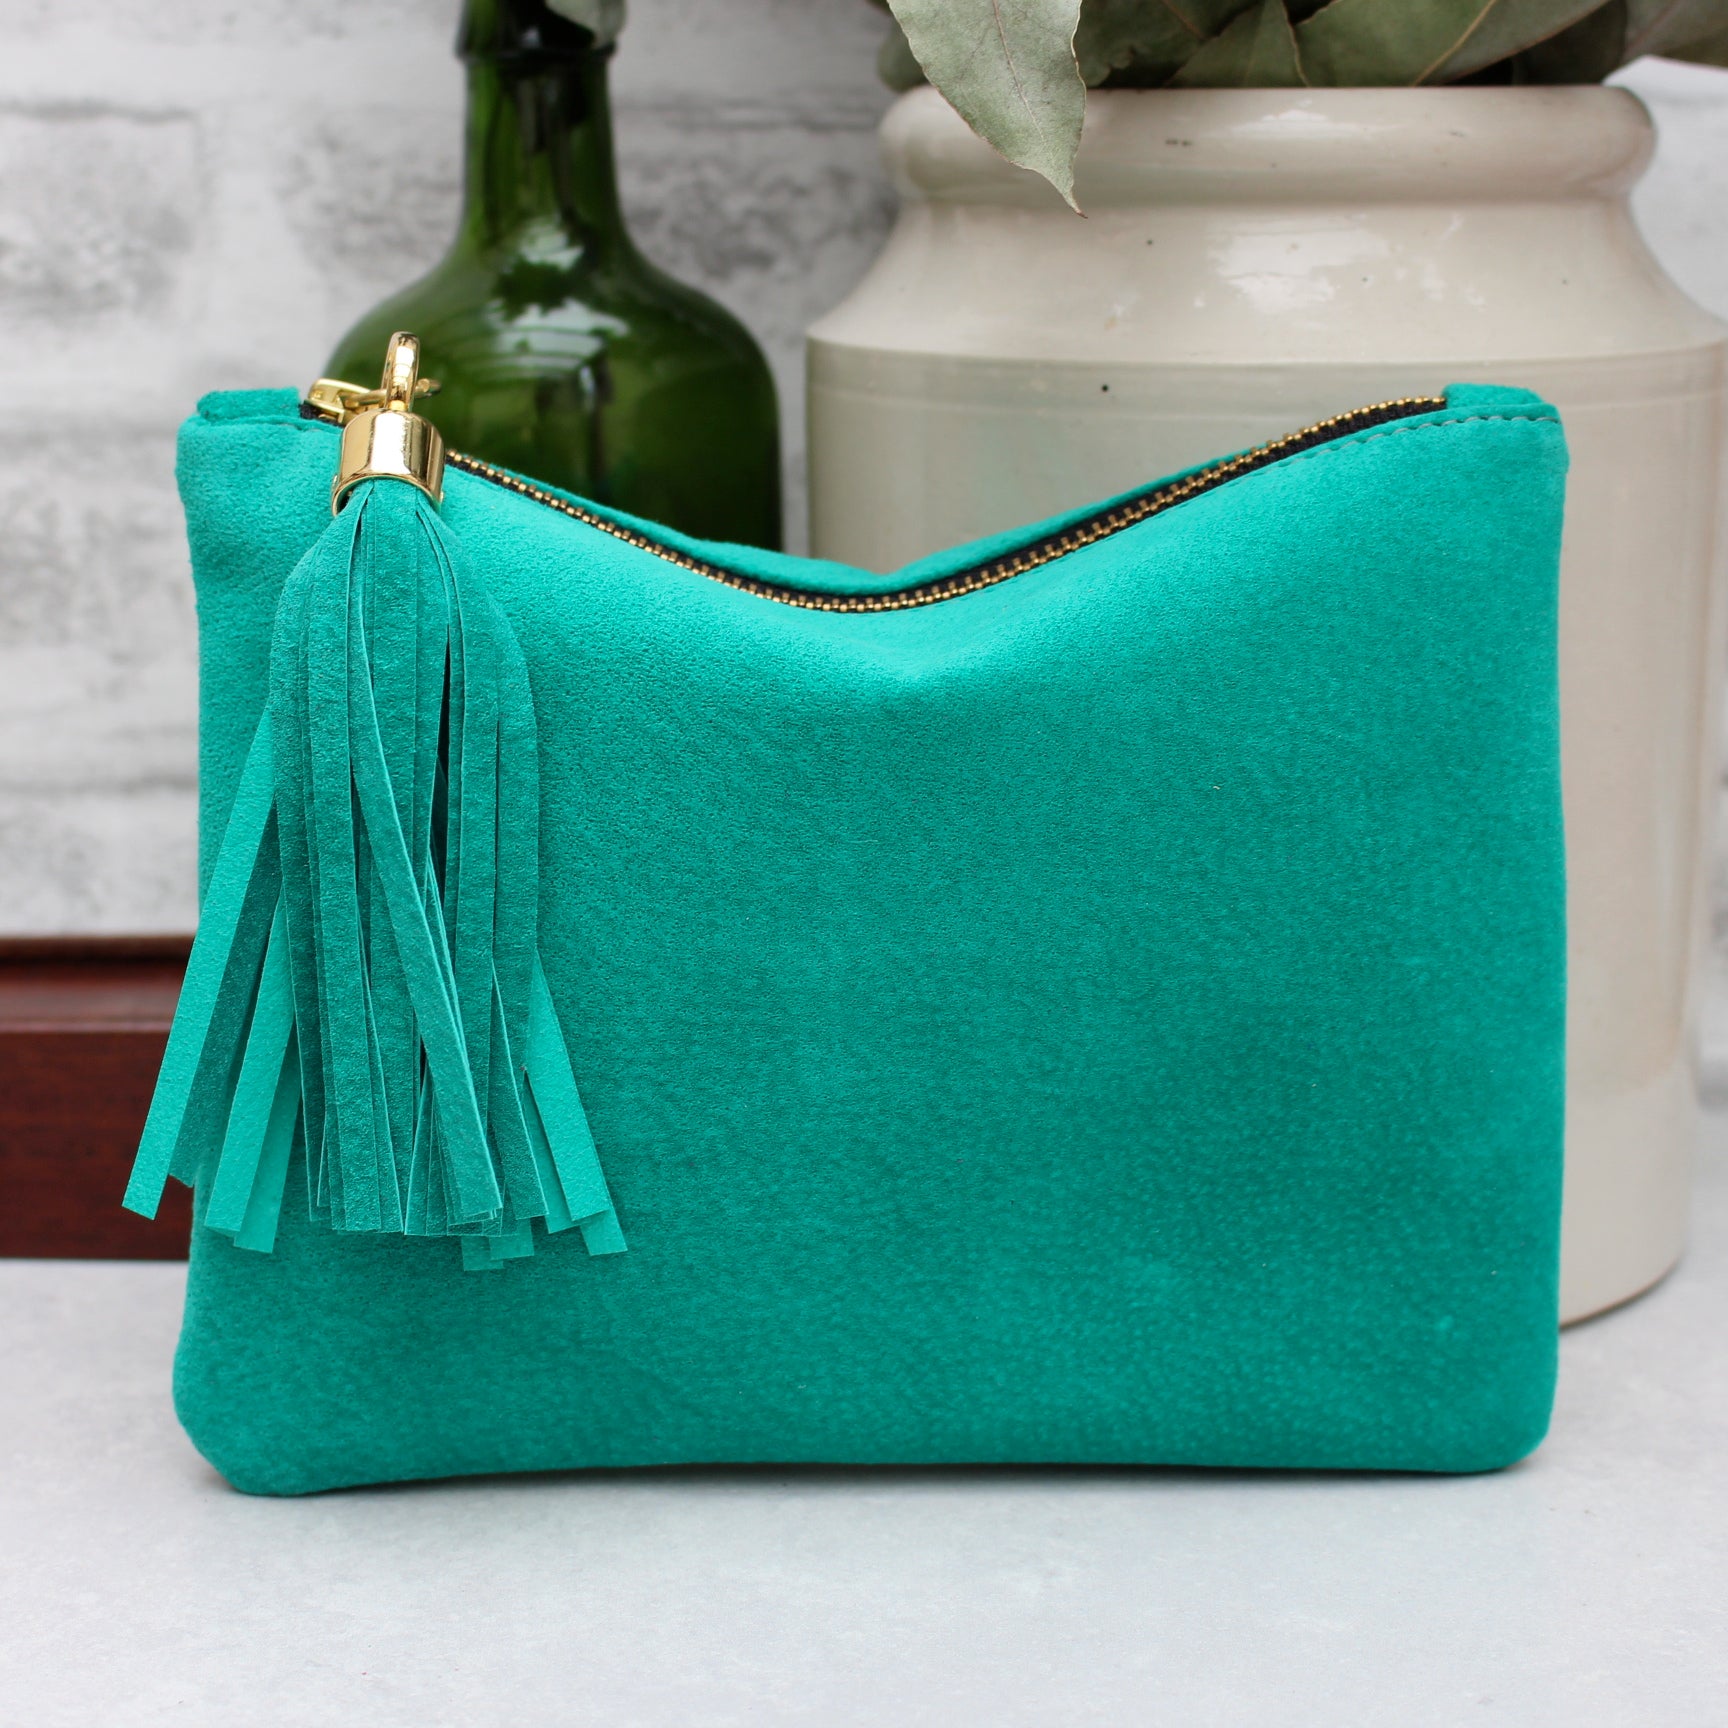 Betsy Mini - green suede